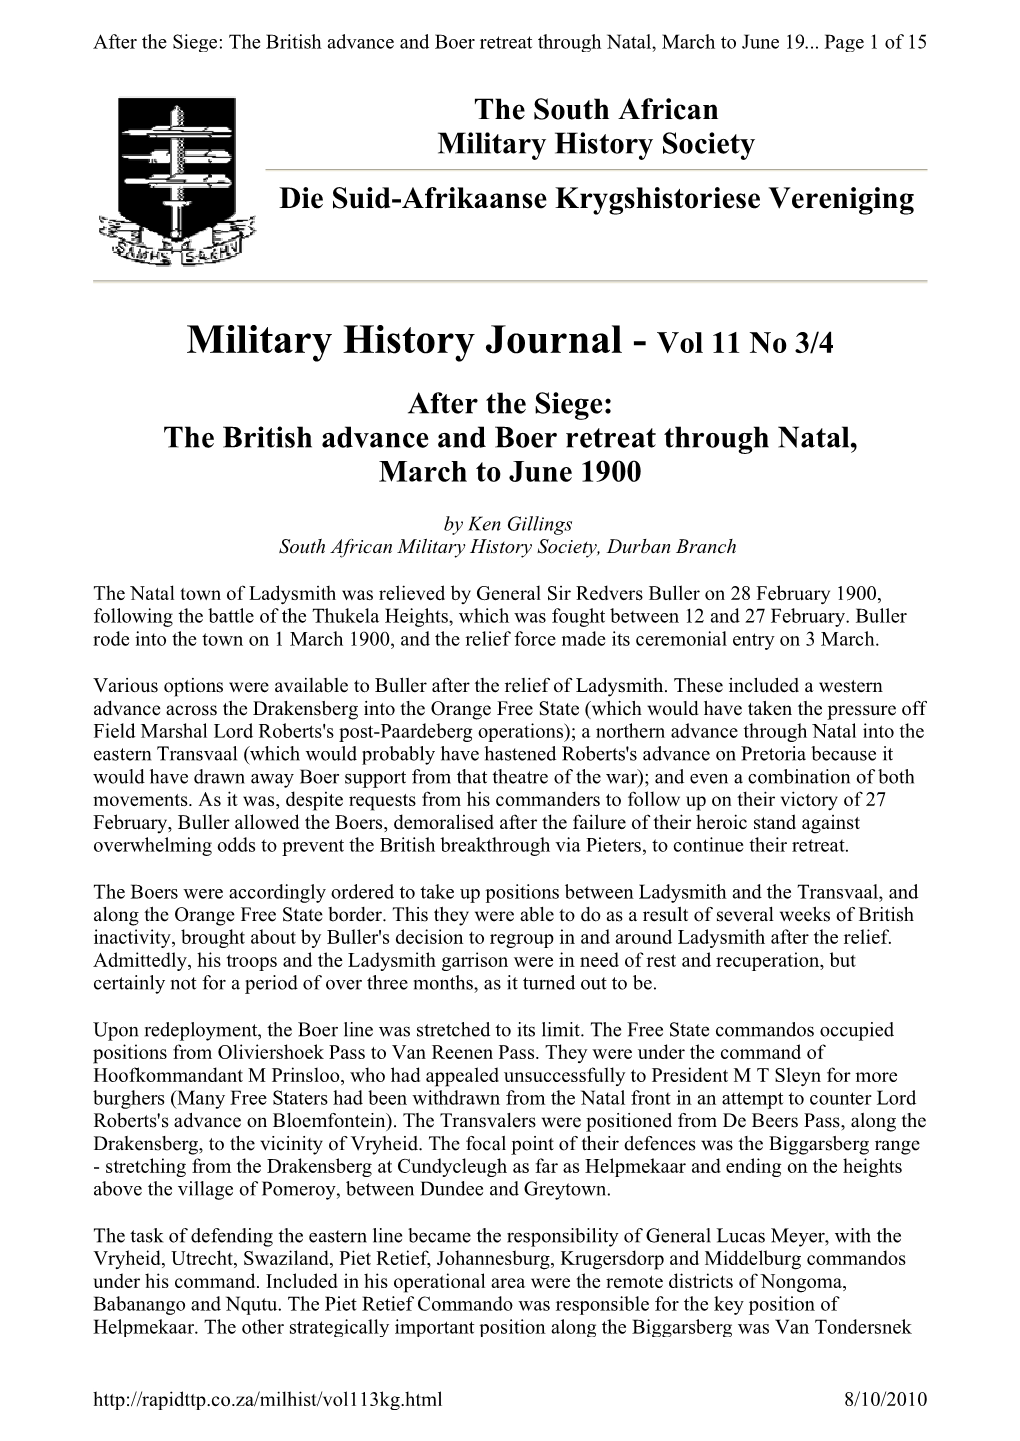 Military History Journal - Vol 11 No 3/4 After the Siege: the British Advance and Boer Retreat Through Natal, March to June 1900